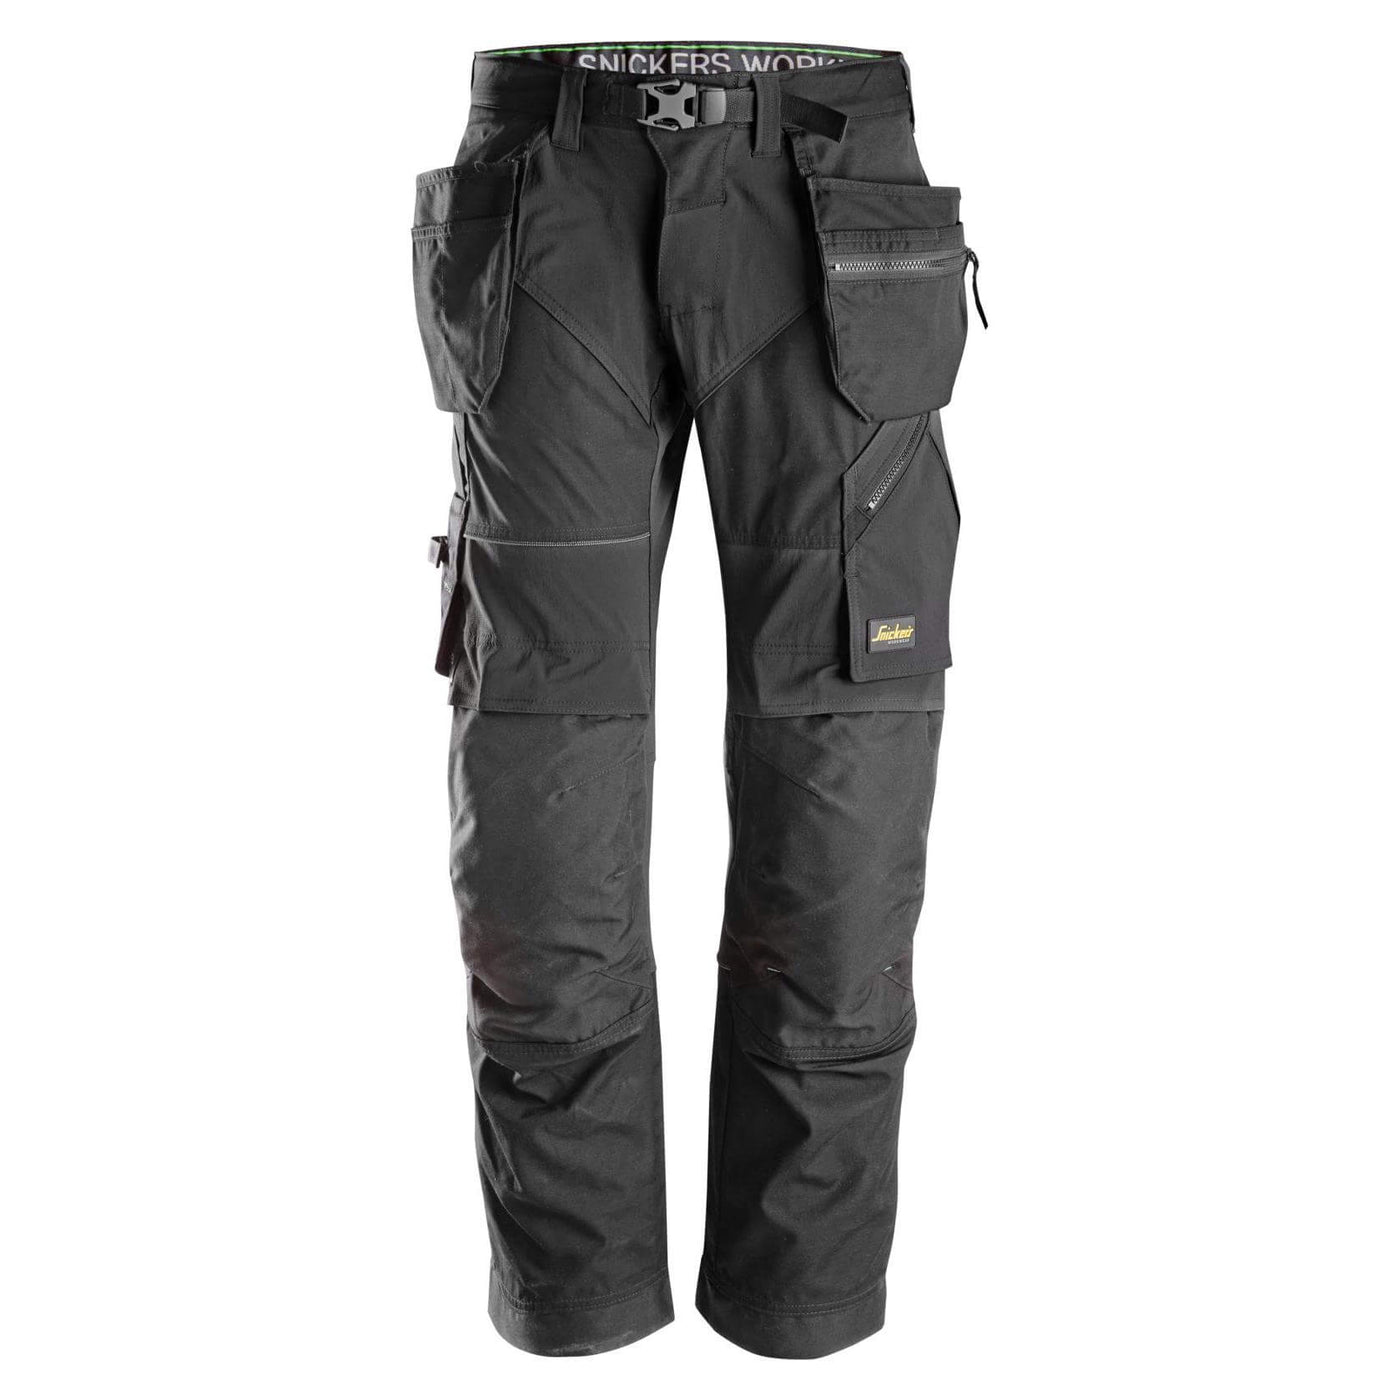 Snickers 6902 FlexiWork Lightweight Work Trousers with Holster Pockets Black Black 3105339 #colour_black-black